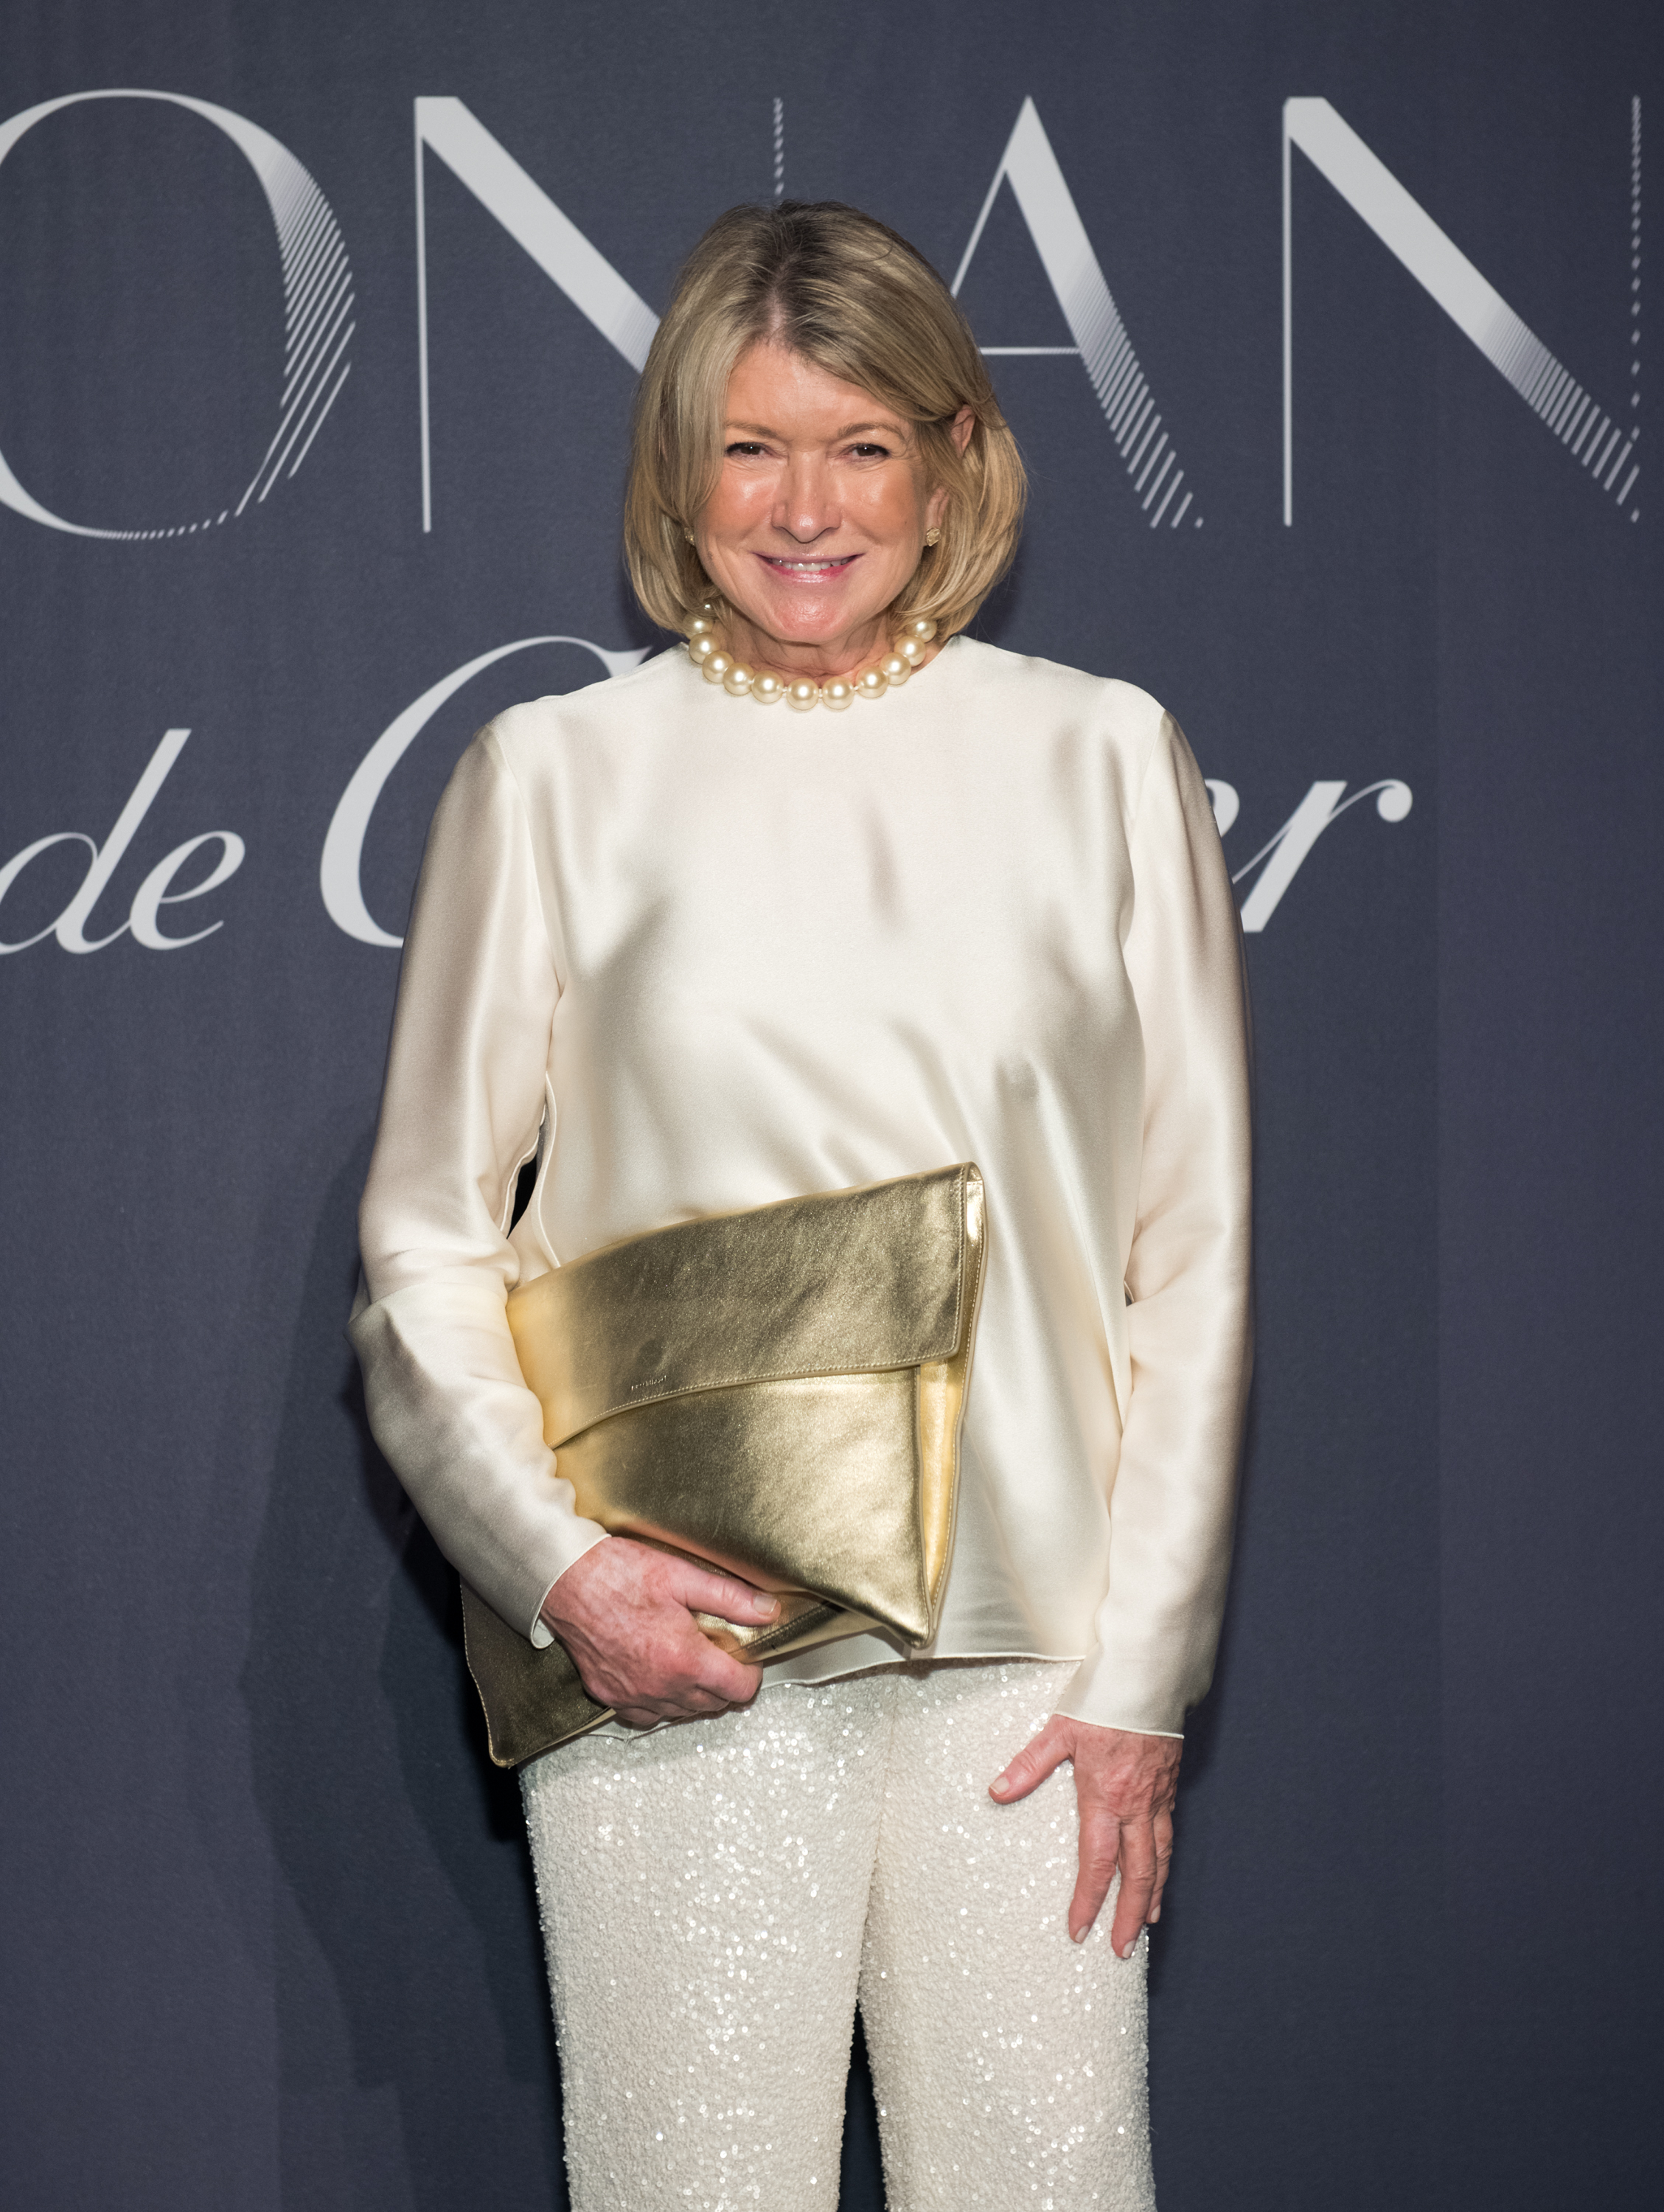 Martha Stewart attends Cartier's celebration of Resonances de Cartier on October 10, 2017, in New York City. | Source: Getty Images